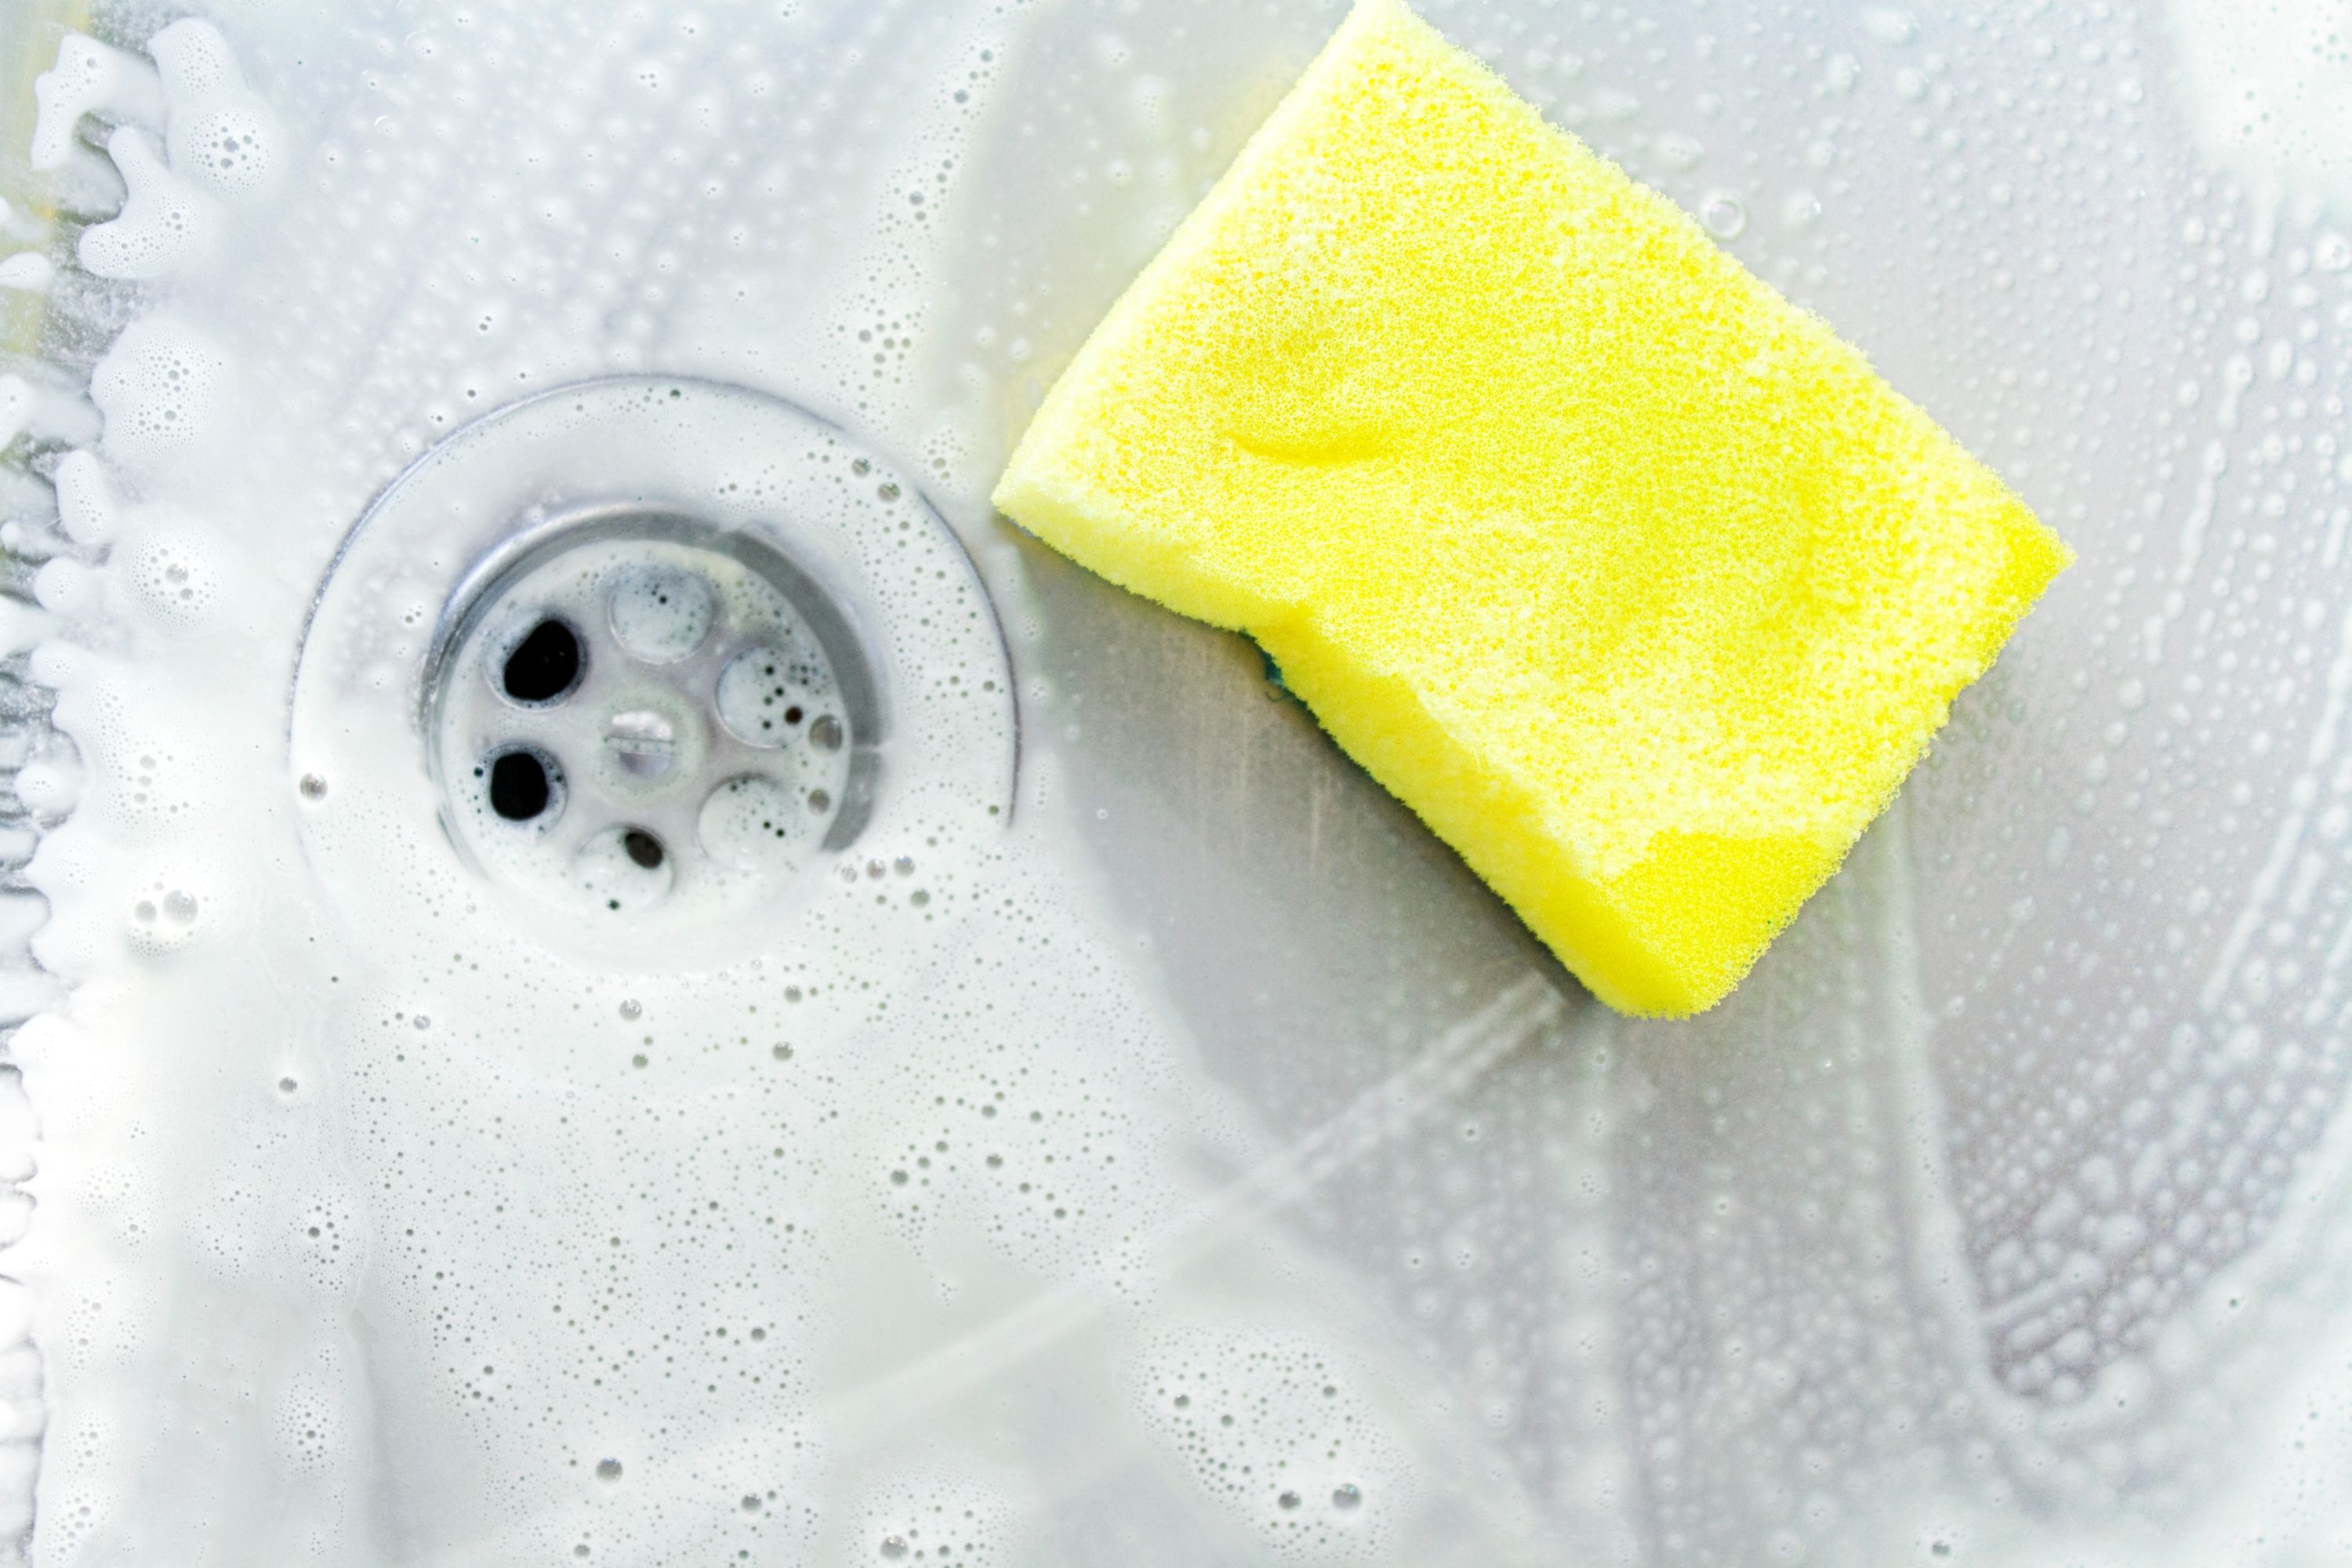 https://hips.hearstapps.com/hmg-prod/images/cleaning-a-sink-with-yellow-sponge-royalty-free-image-1681765892.jpg